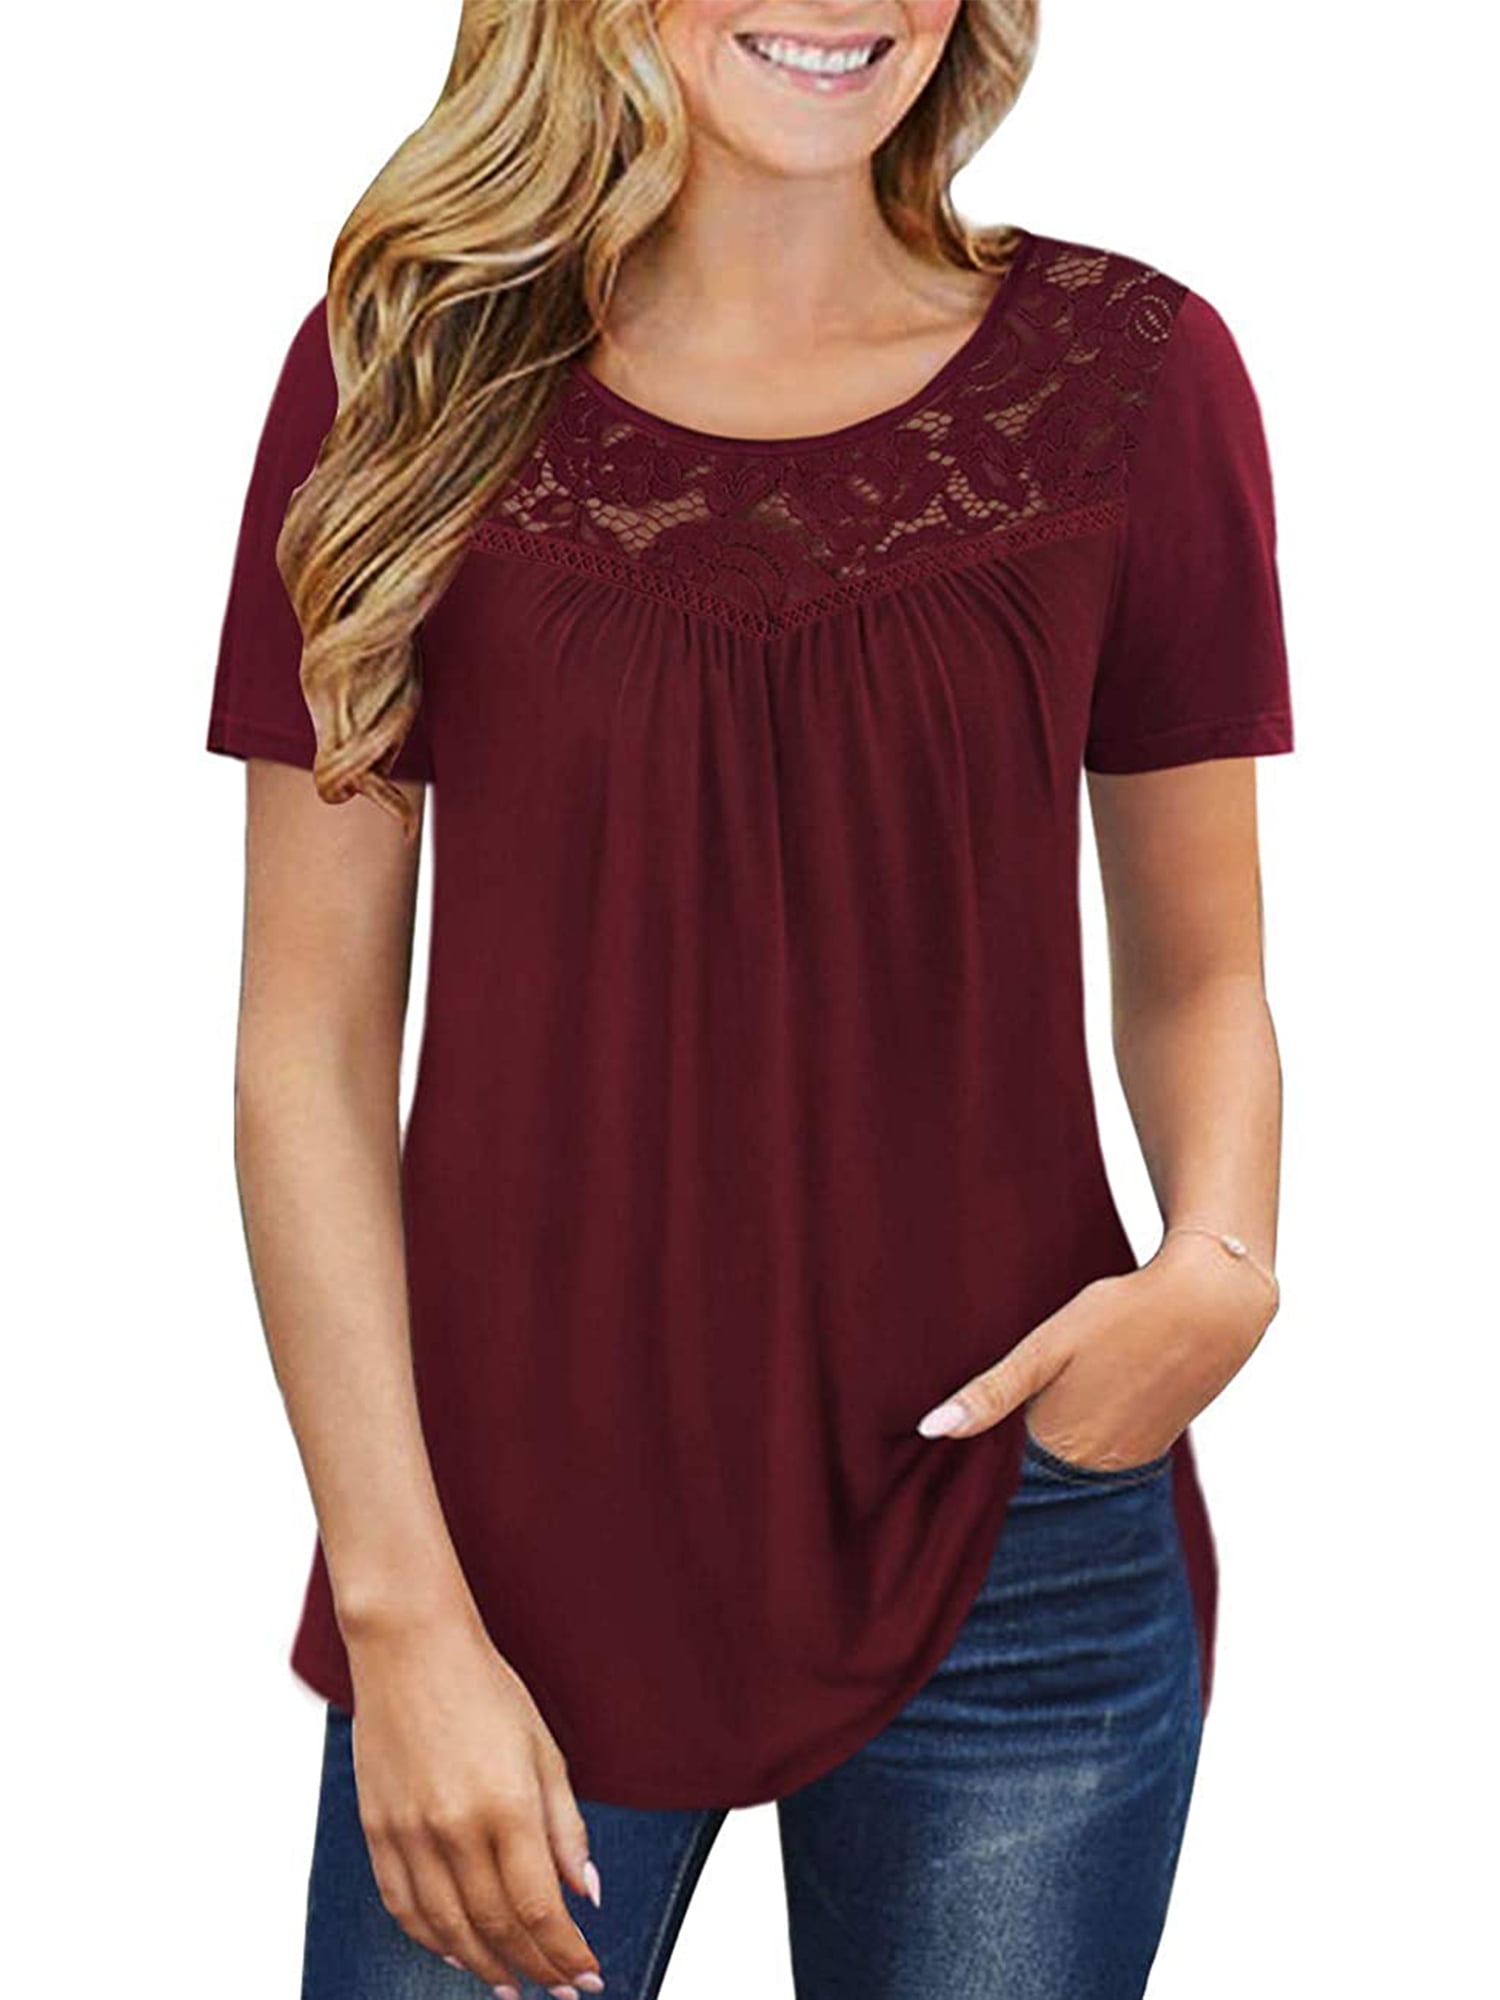 Verno - Women's Plus Size Short Sleeve T Shirts Lace Pleated Tunic Tops ...